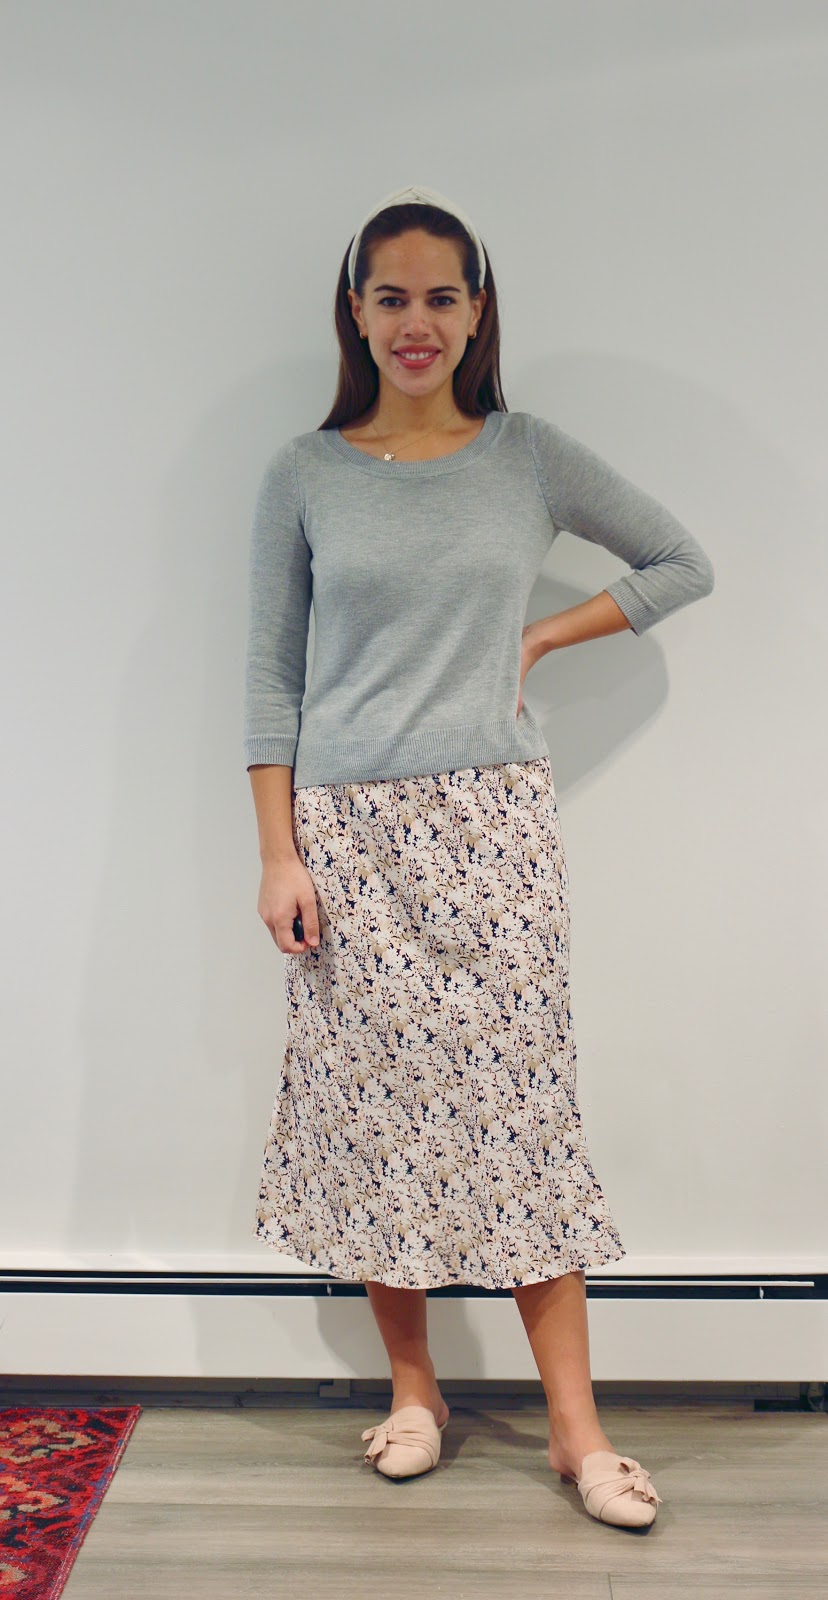 Jules in Flats - Floral Print Midi Skirt (Business Casual Workwear on a Budget)